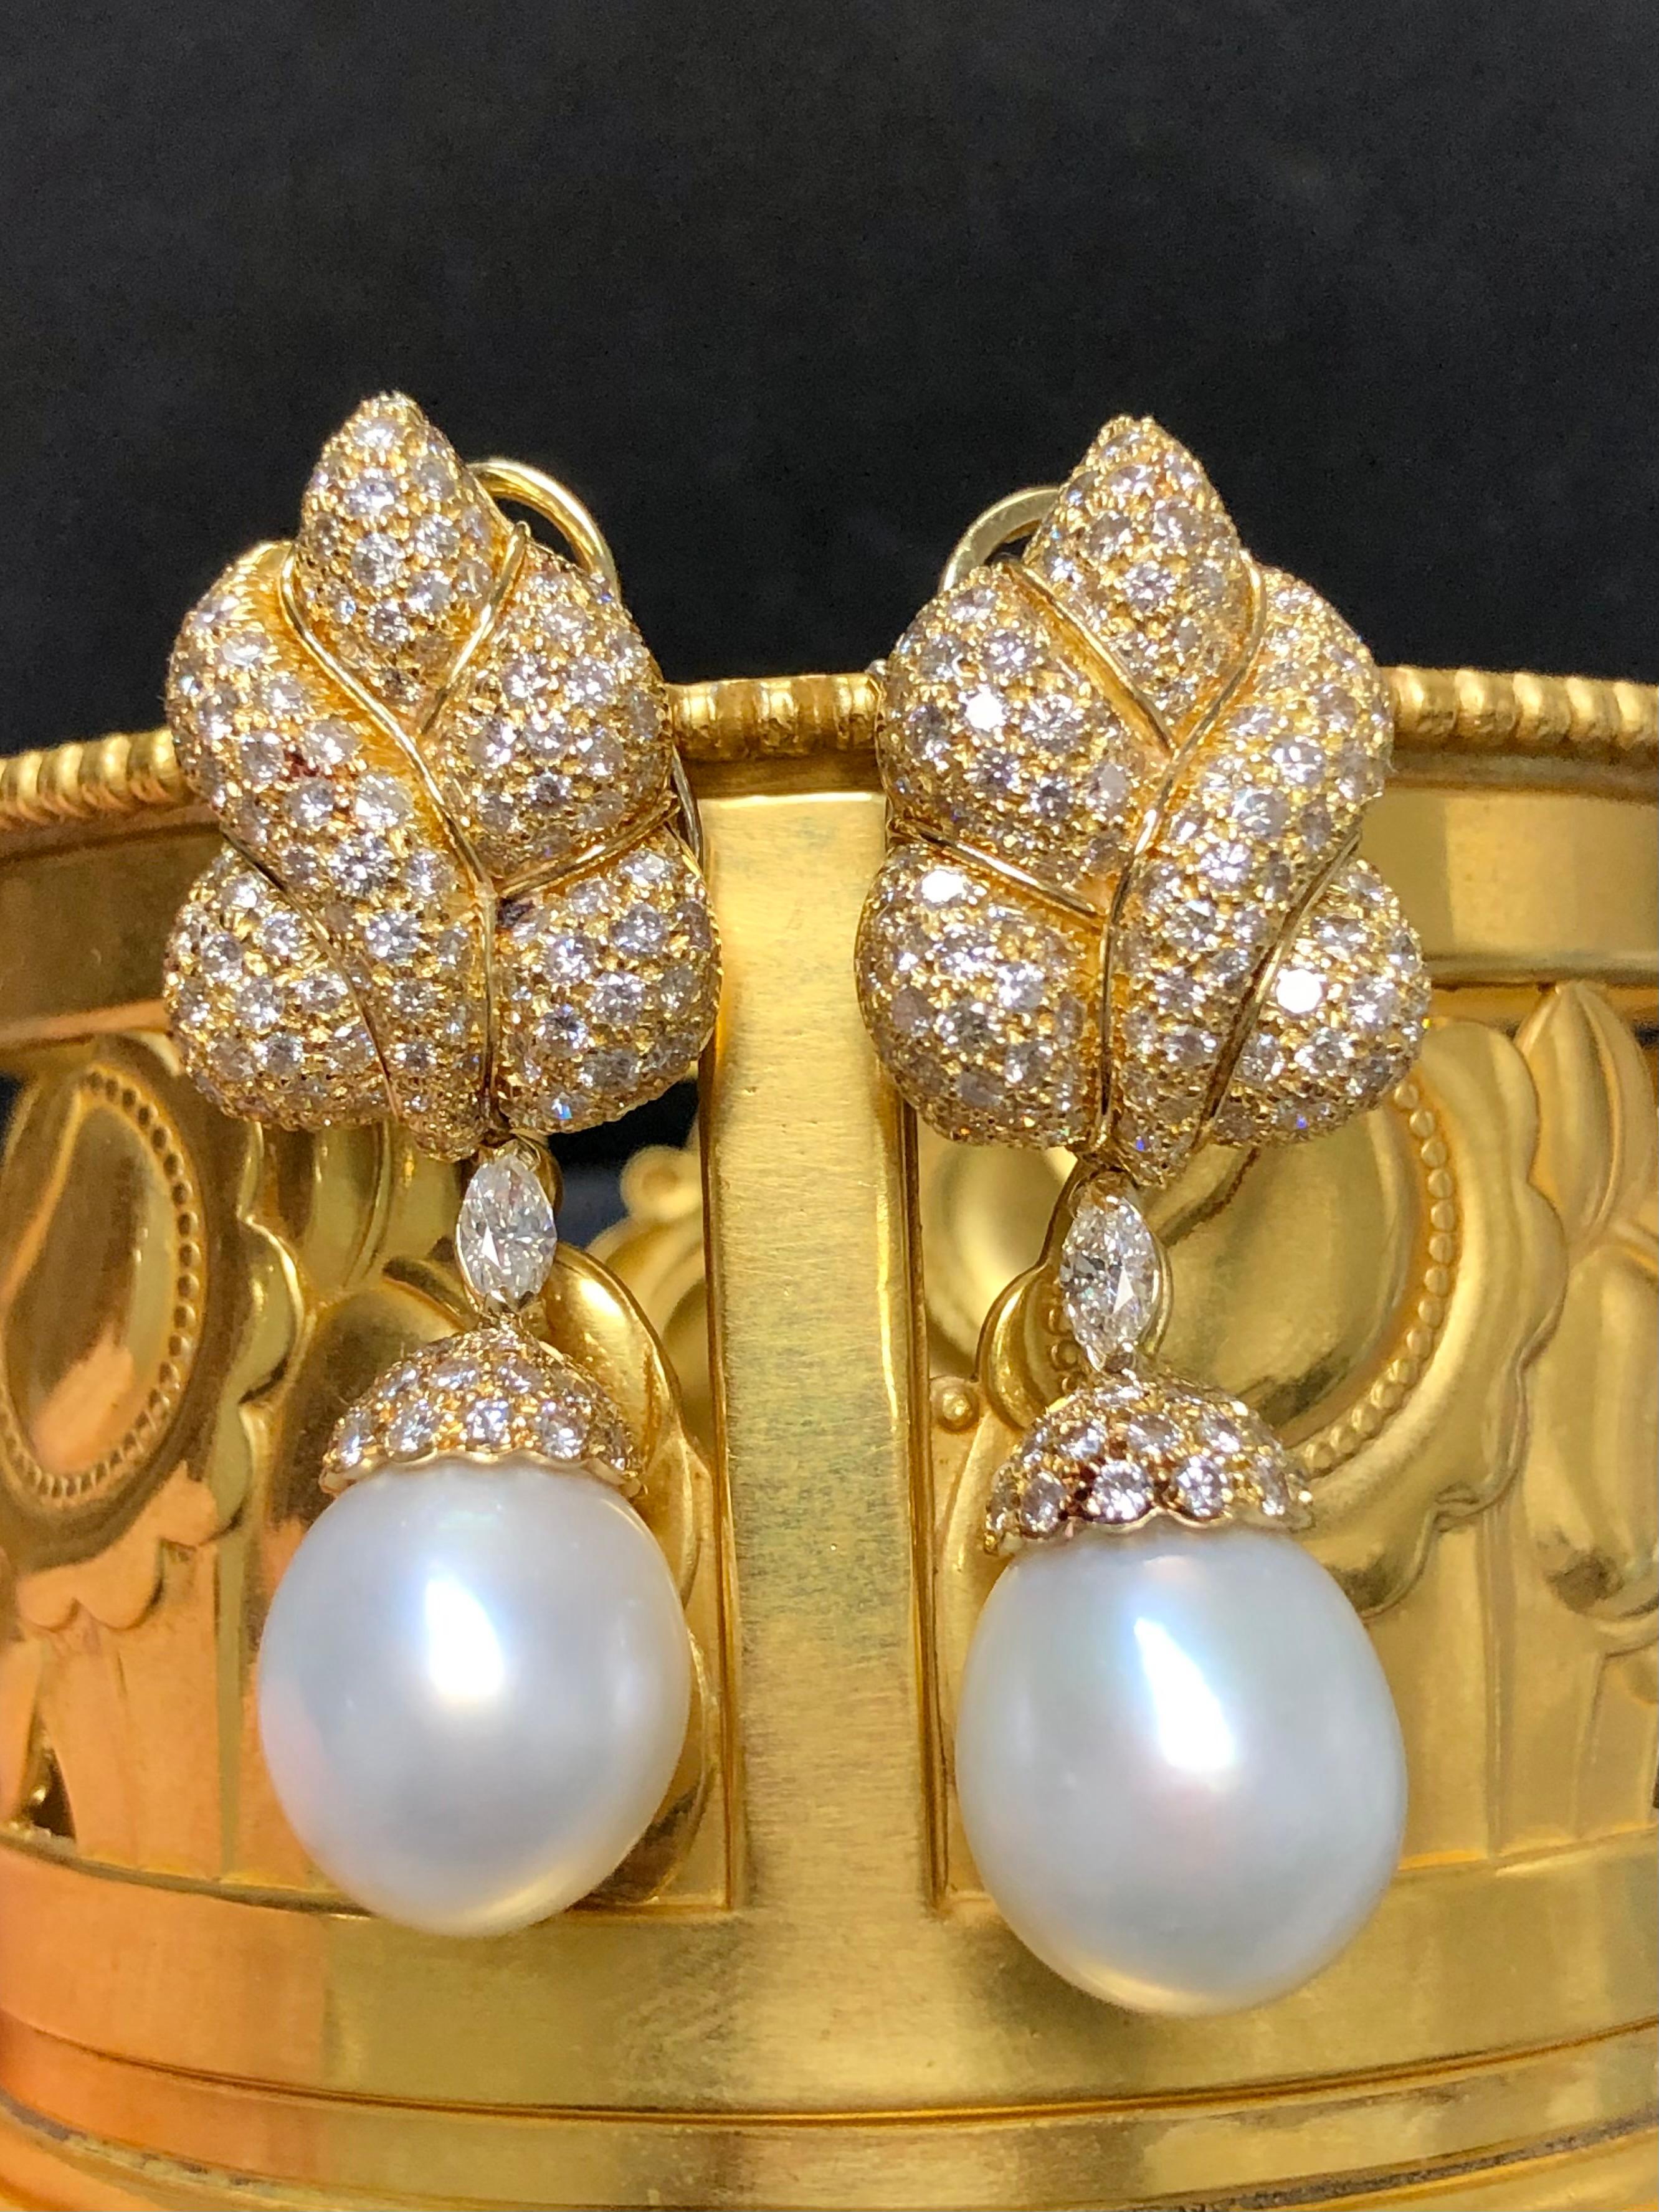 
A spectacular pair of South Sea pearl and diamond earrings by Italian designer GIOVANE. They are crafted in 18K yellow gold and set with approximately 7.60cttw in G-H color Vs1-2 clarity round and marquise cut diamonds. The pearls and marquise